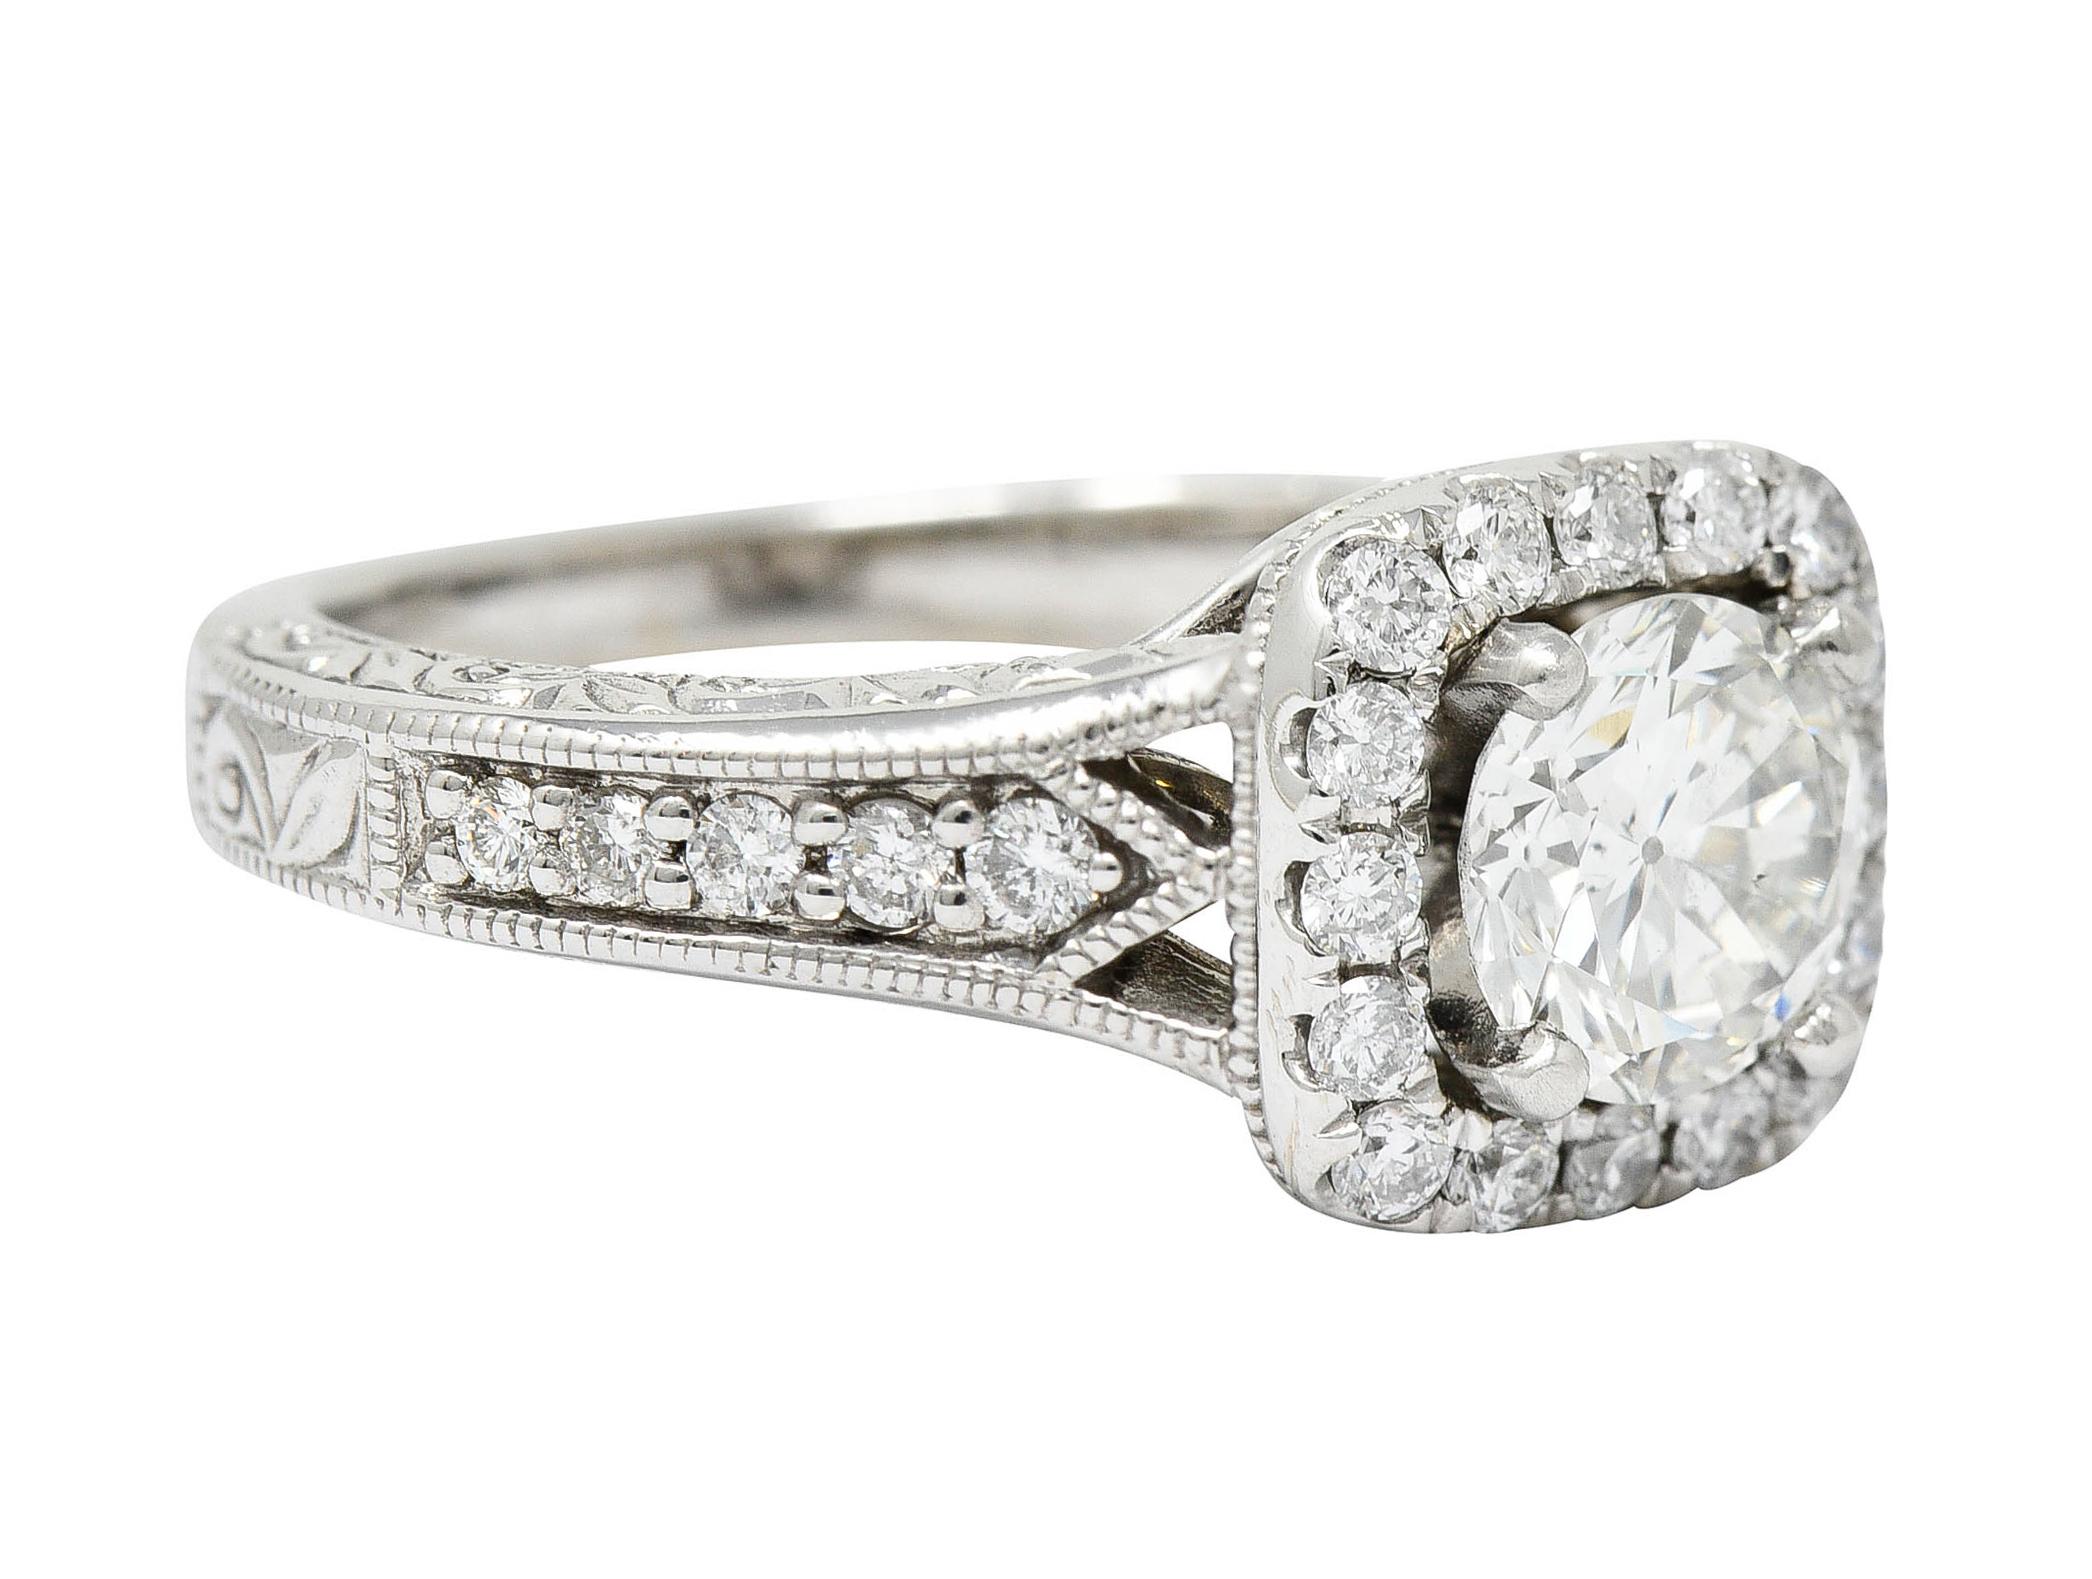 Designed as an ornate mounting with a scrolled volute gallery and pointed shoulders

Centering a transitional cut diamond weighing 1.02 carats - J color with SI1

With a diamond halo and diamond accented shoulders

Weighing in total approximately